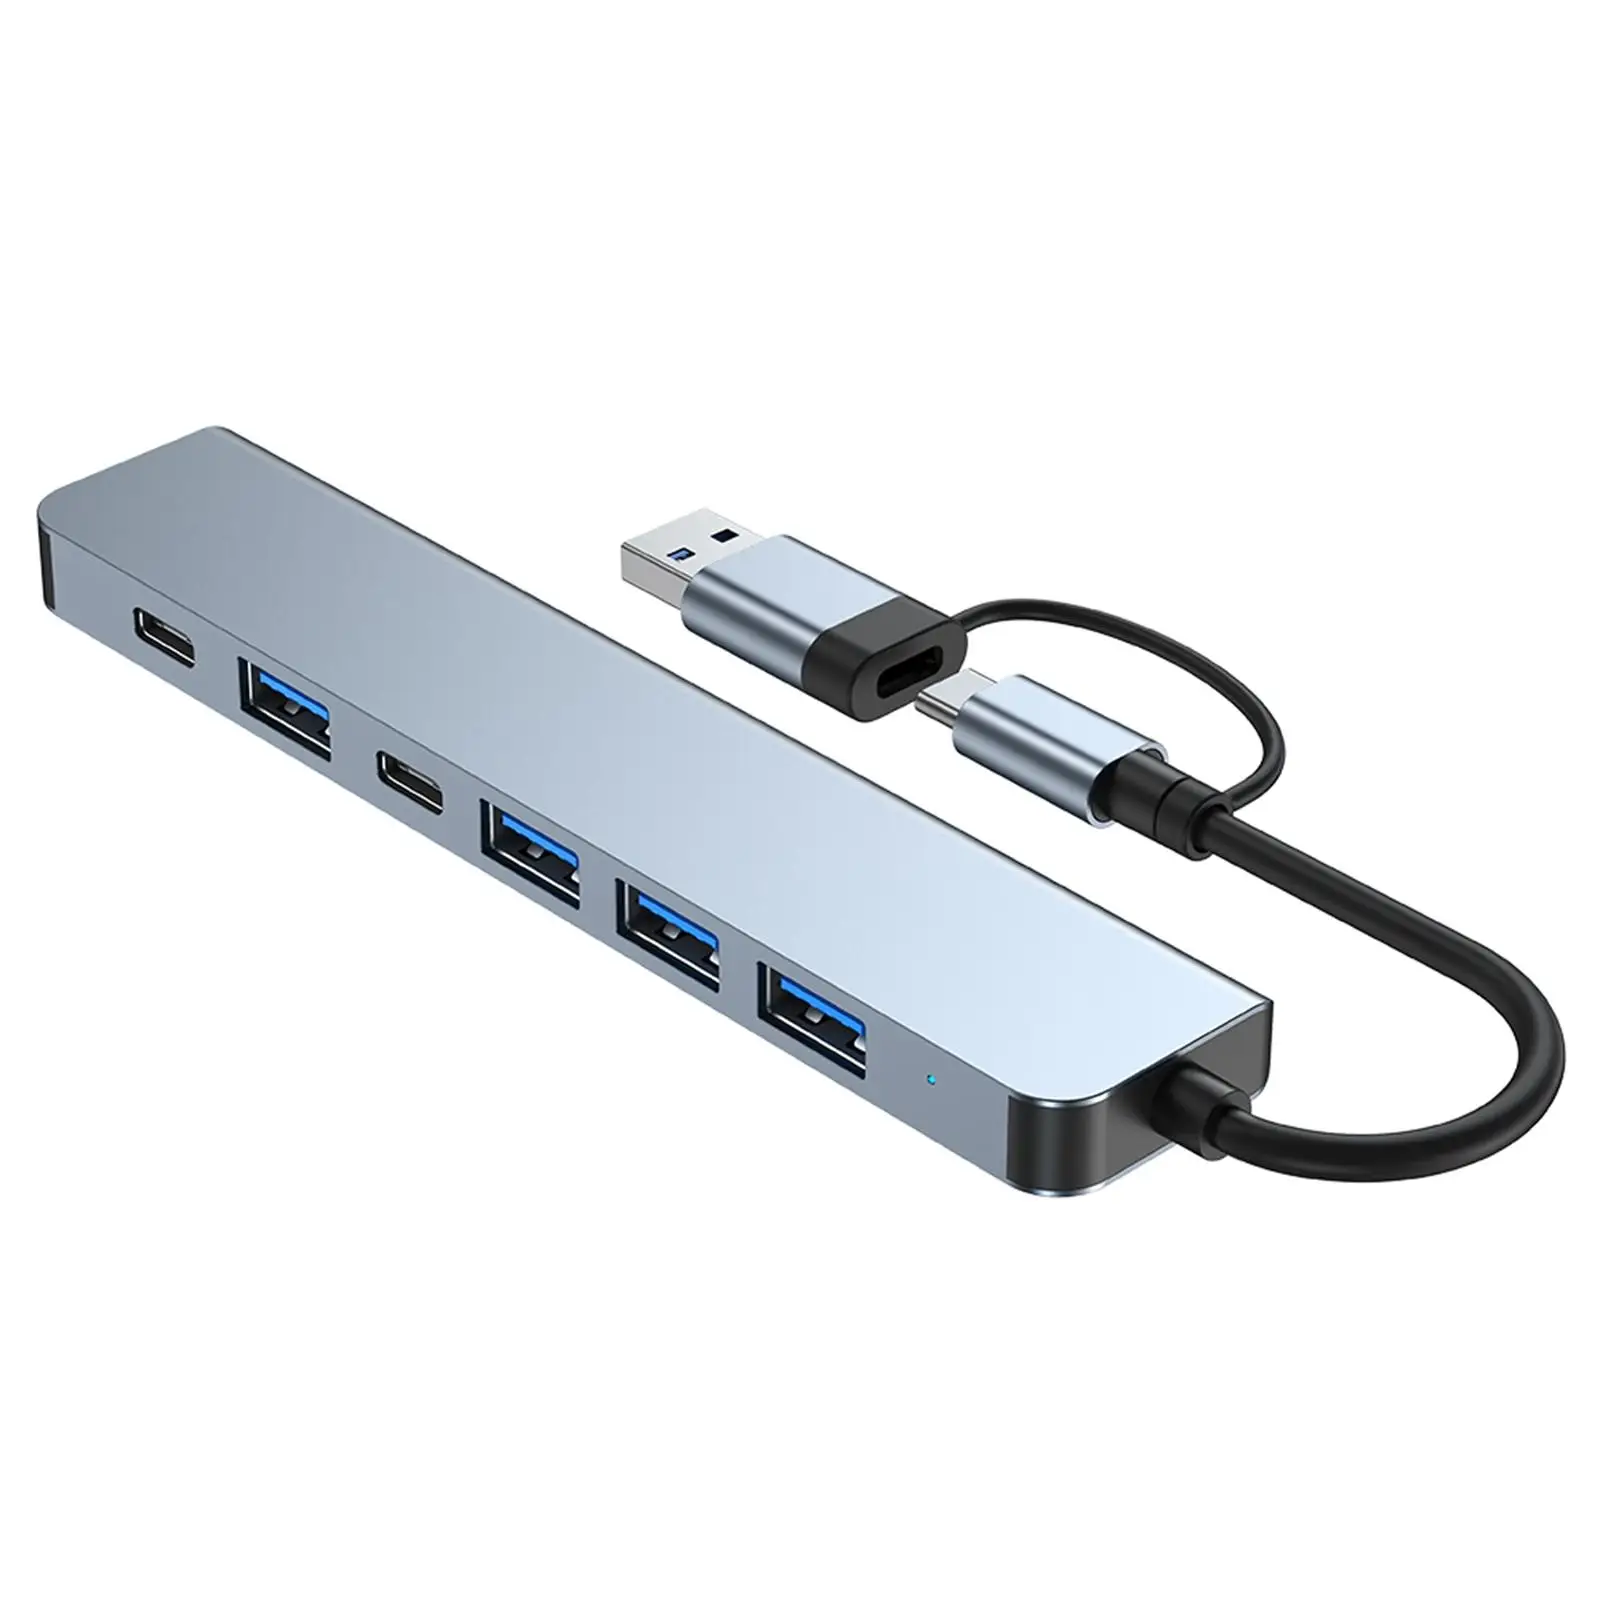 Portable USB Type C Hub Plug and Play Compact 5Gbps Transfer Rate Docking Station for Phs